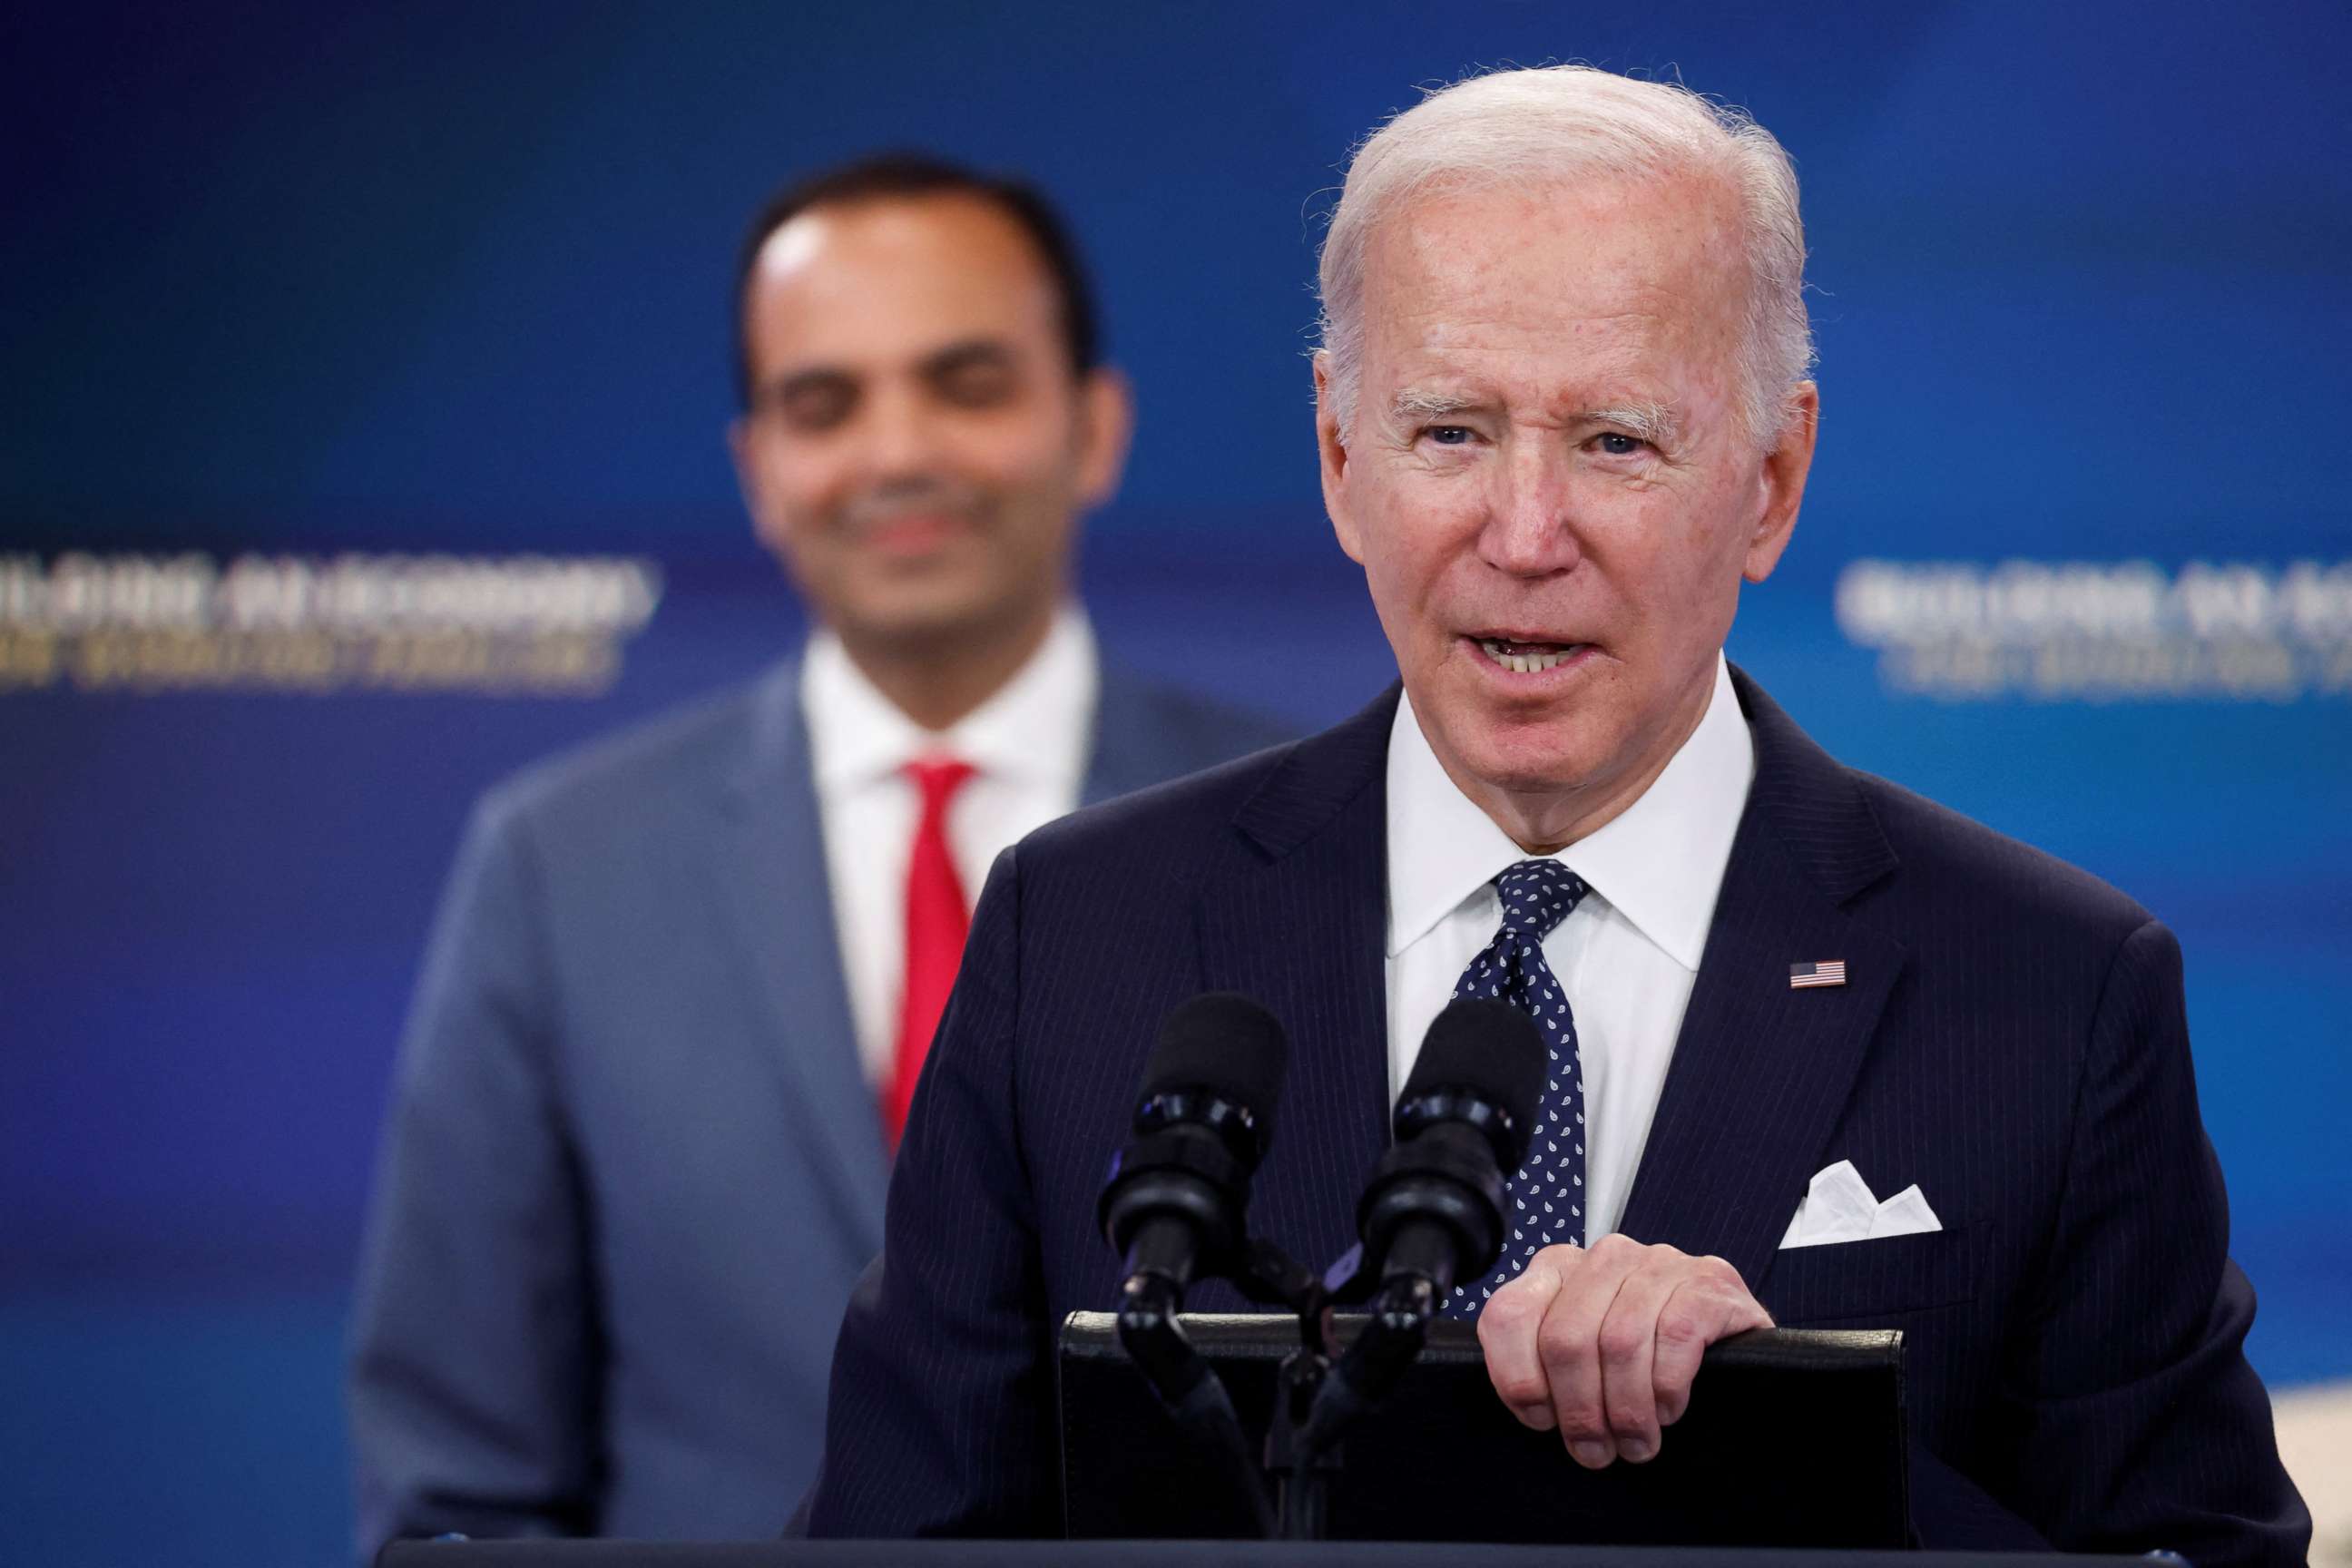 PHOTO: President Joe Biden delivers remarks on the U.S. economy from an auditorium on the White House campus in Washington, October 26, 2022.